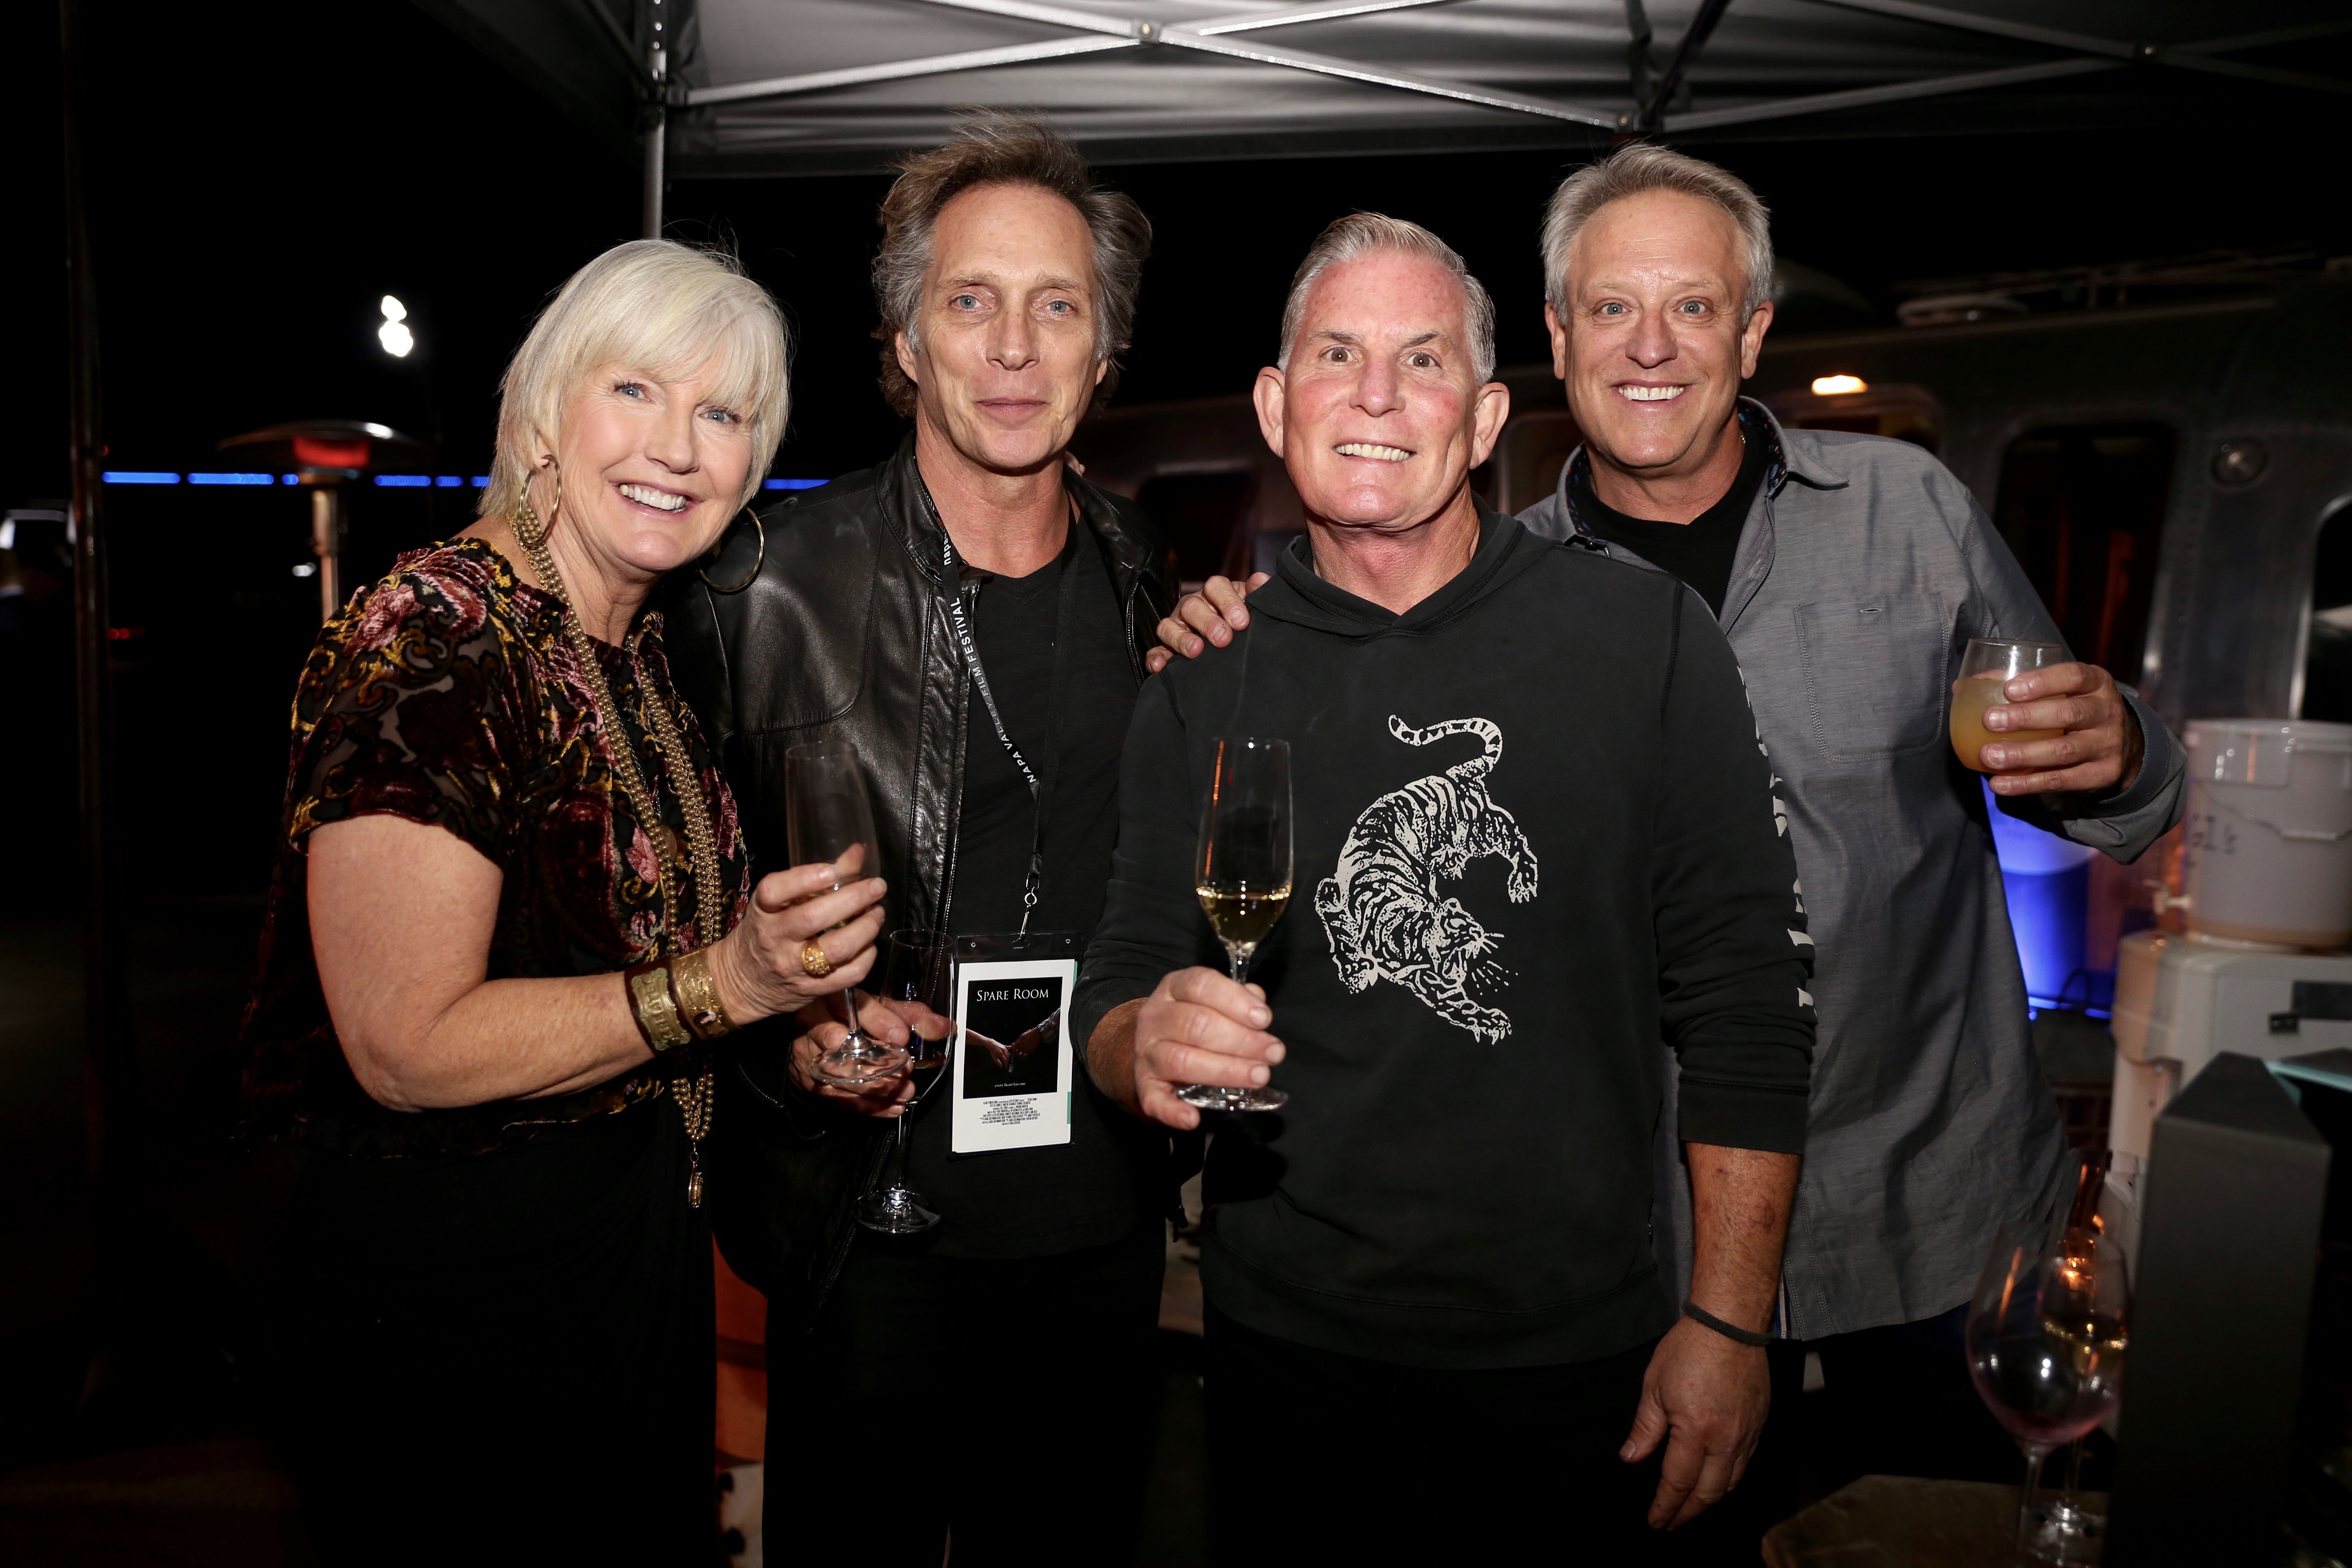 Vintner Steve Reynolds with sister, Cathy brother in law, Todd and Actor William Richtner